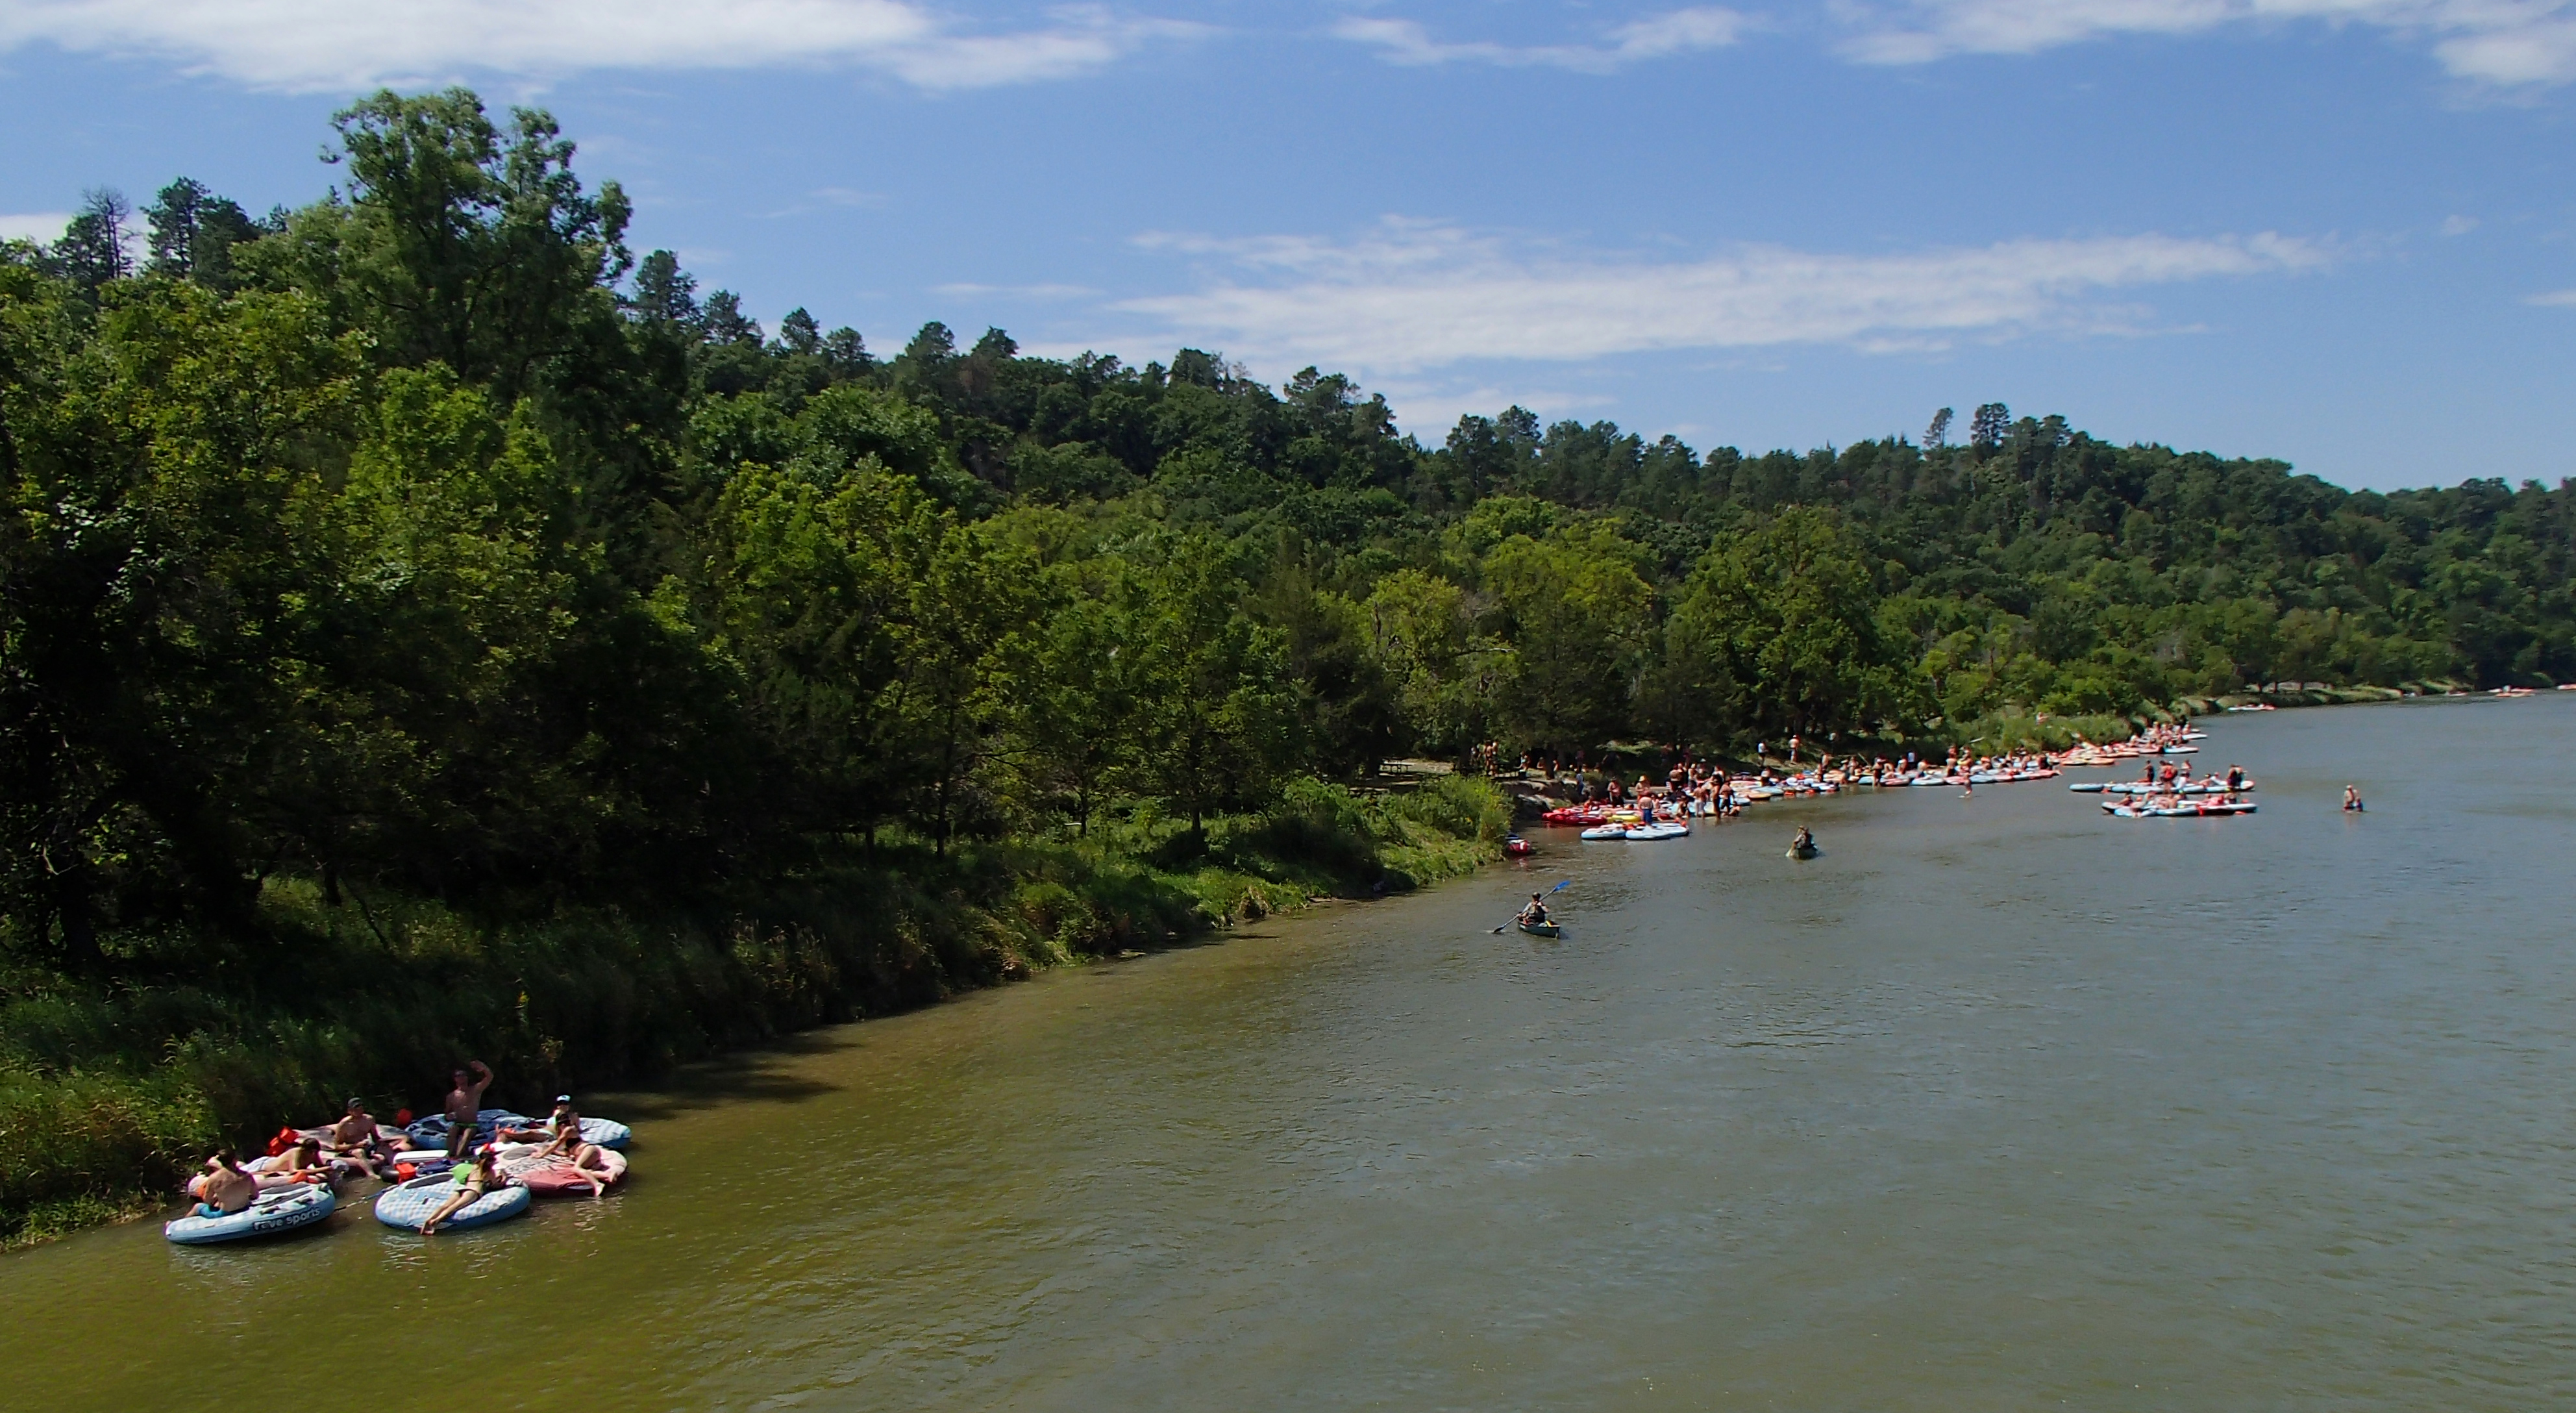 Many people on tubes float down the Niobrara.